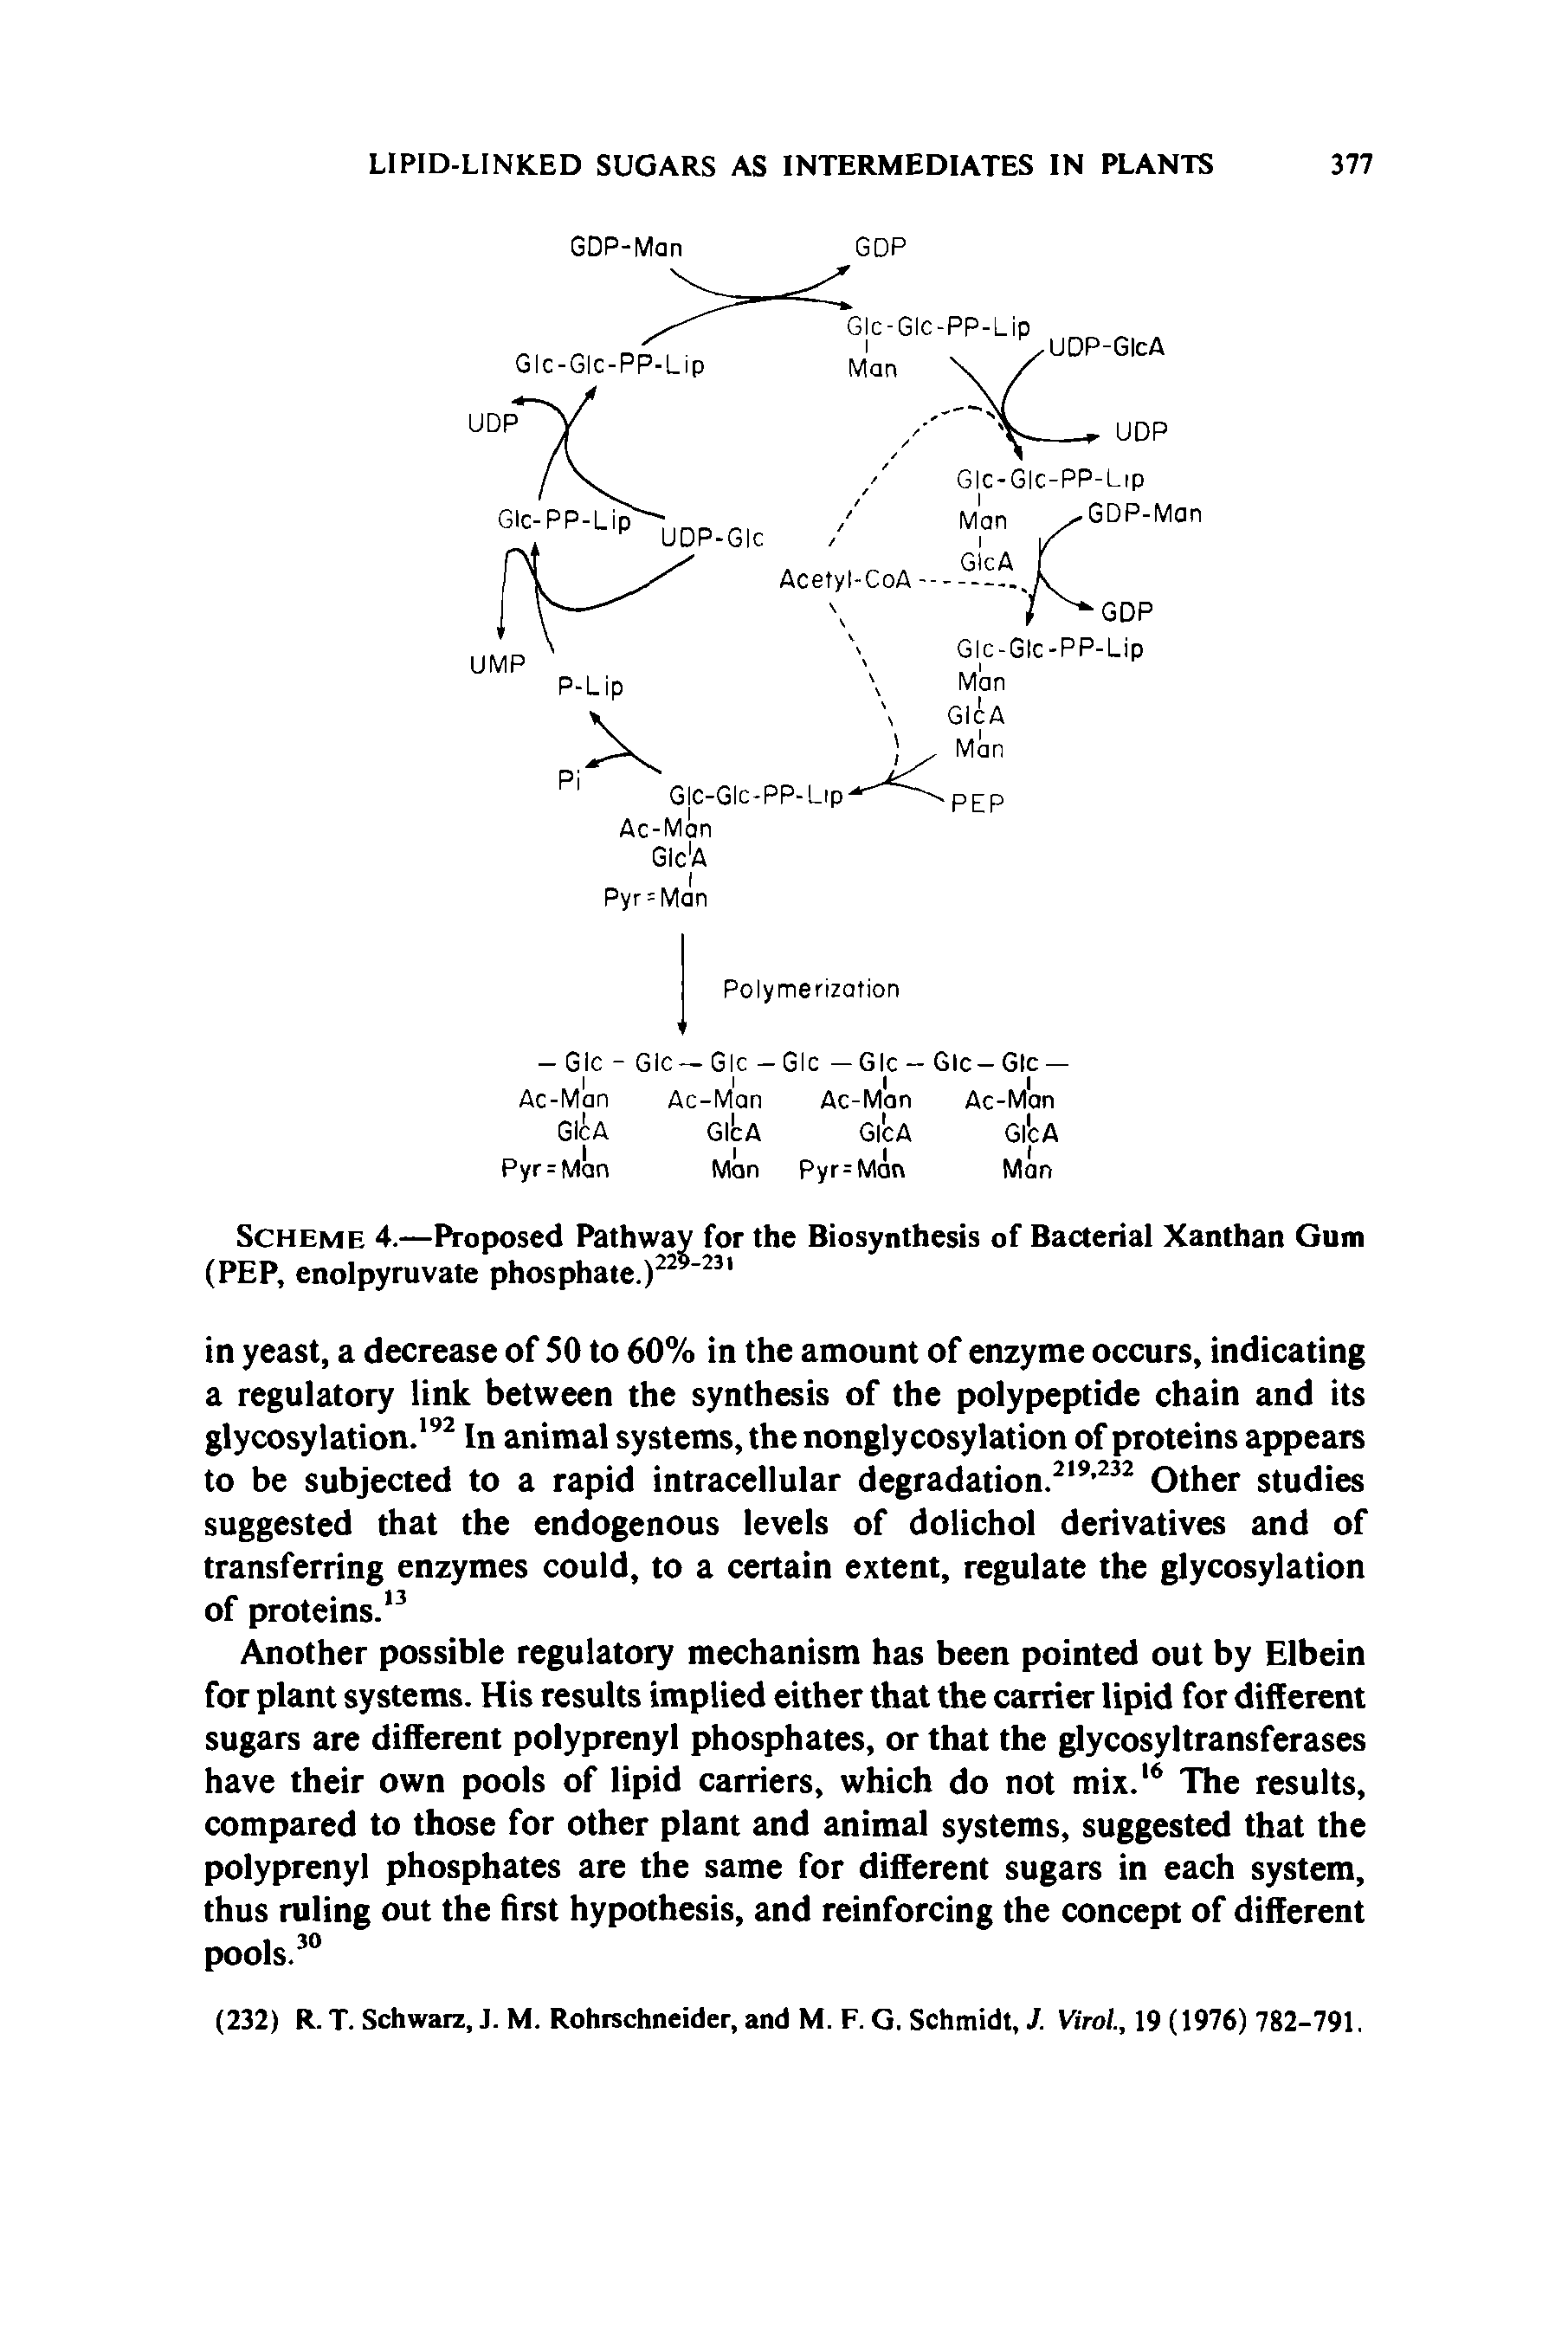 Scheme 4.—Proposed Pathway for the Biosynthesis of Bacterial Xanthan Gum (PEP, enolpyruvate phosphate.)2 231...